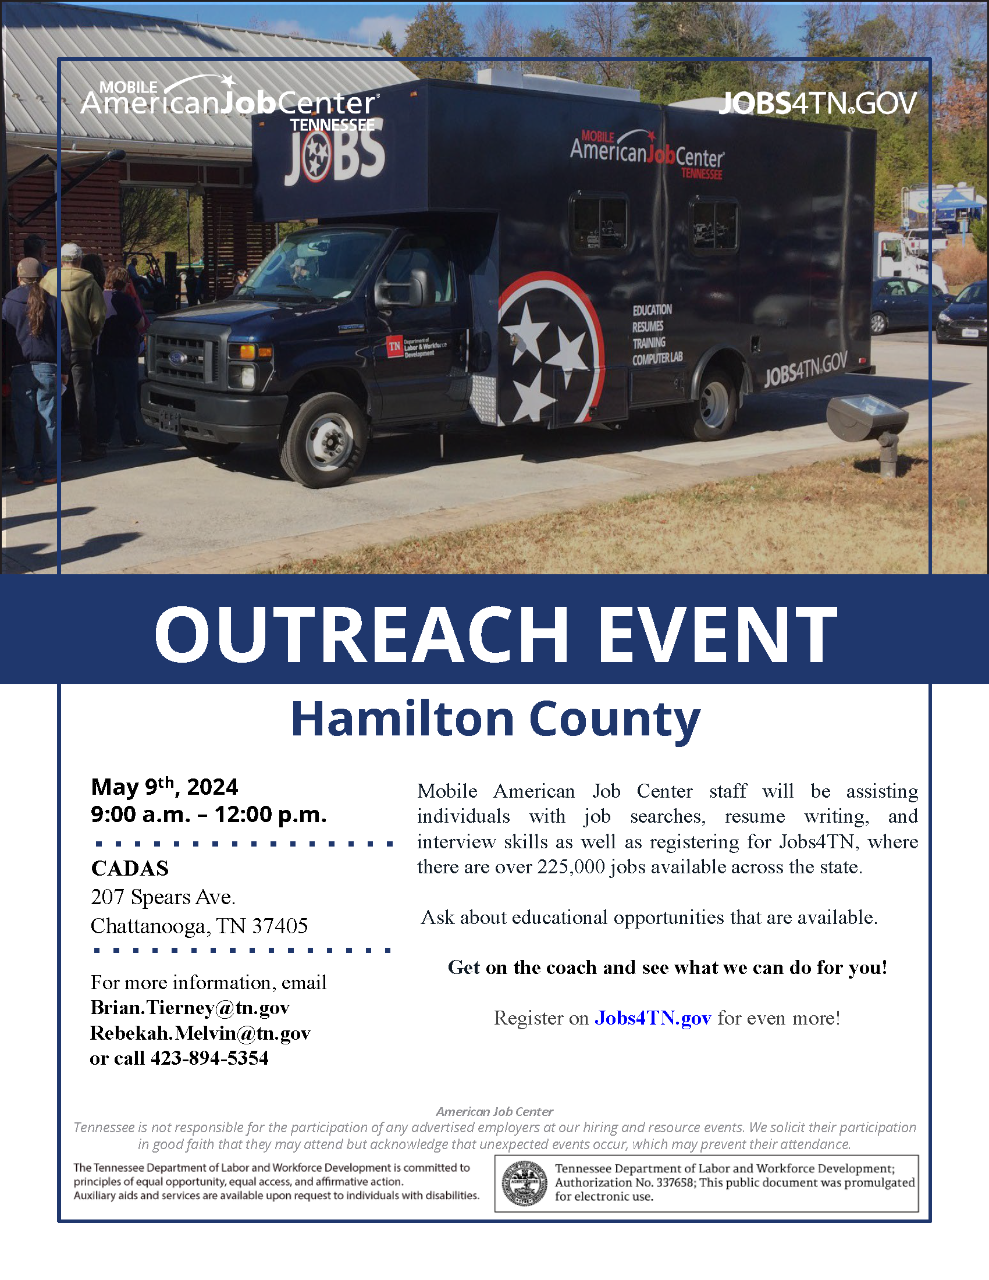 MAJC Outreach Event in Chattanooga is May 9